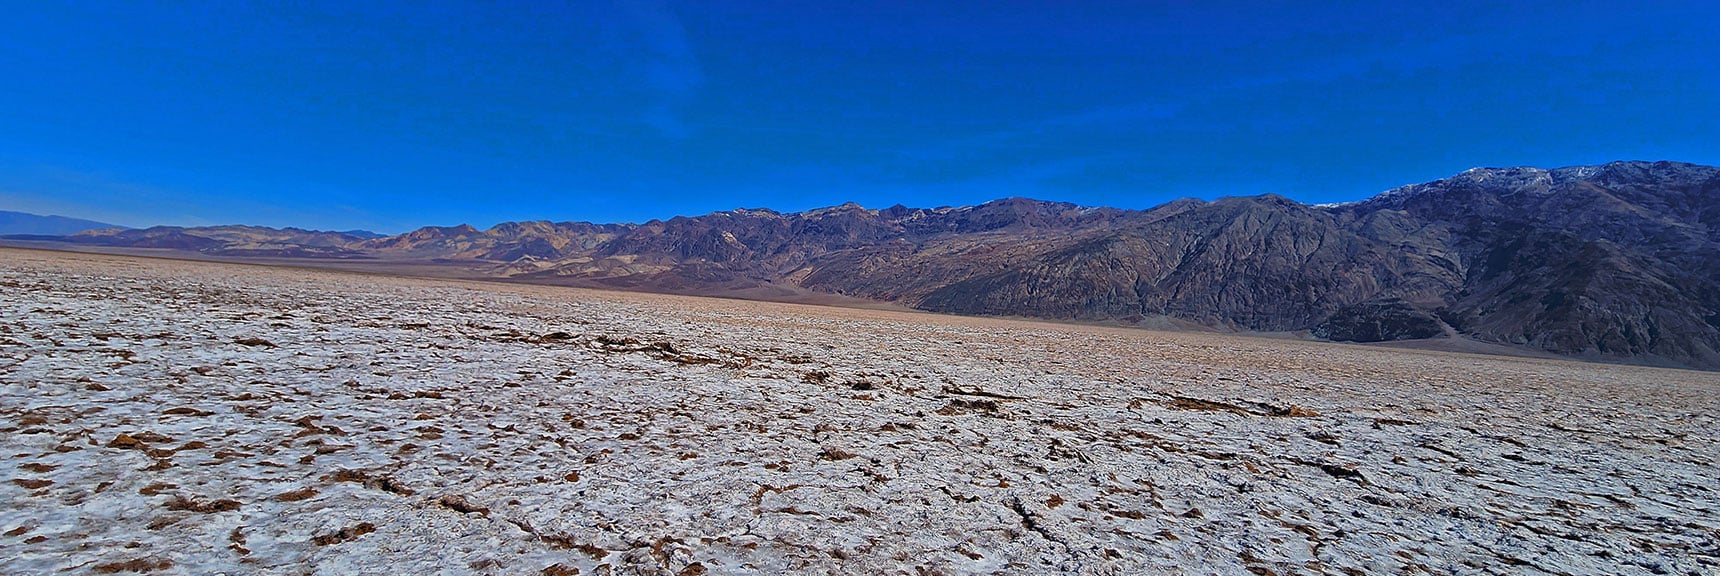 View Northeast. Note Gradual Incline in Black Mountains as Possible Ascent Point | Death Valley Crossing | Death Valley National Park, California | David Smith | LasVegasAreaTrails.com